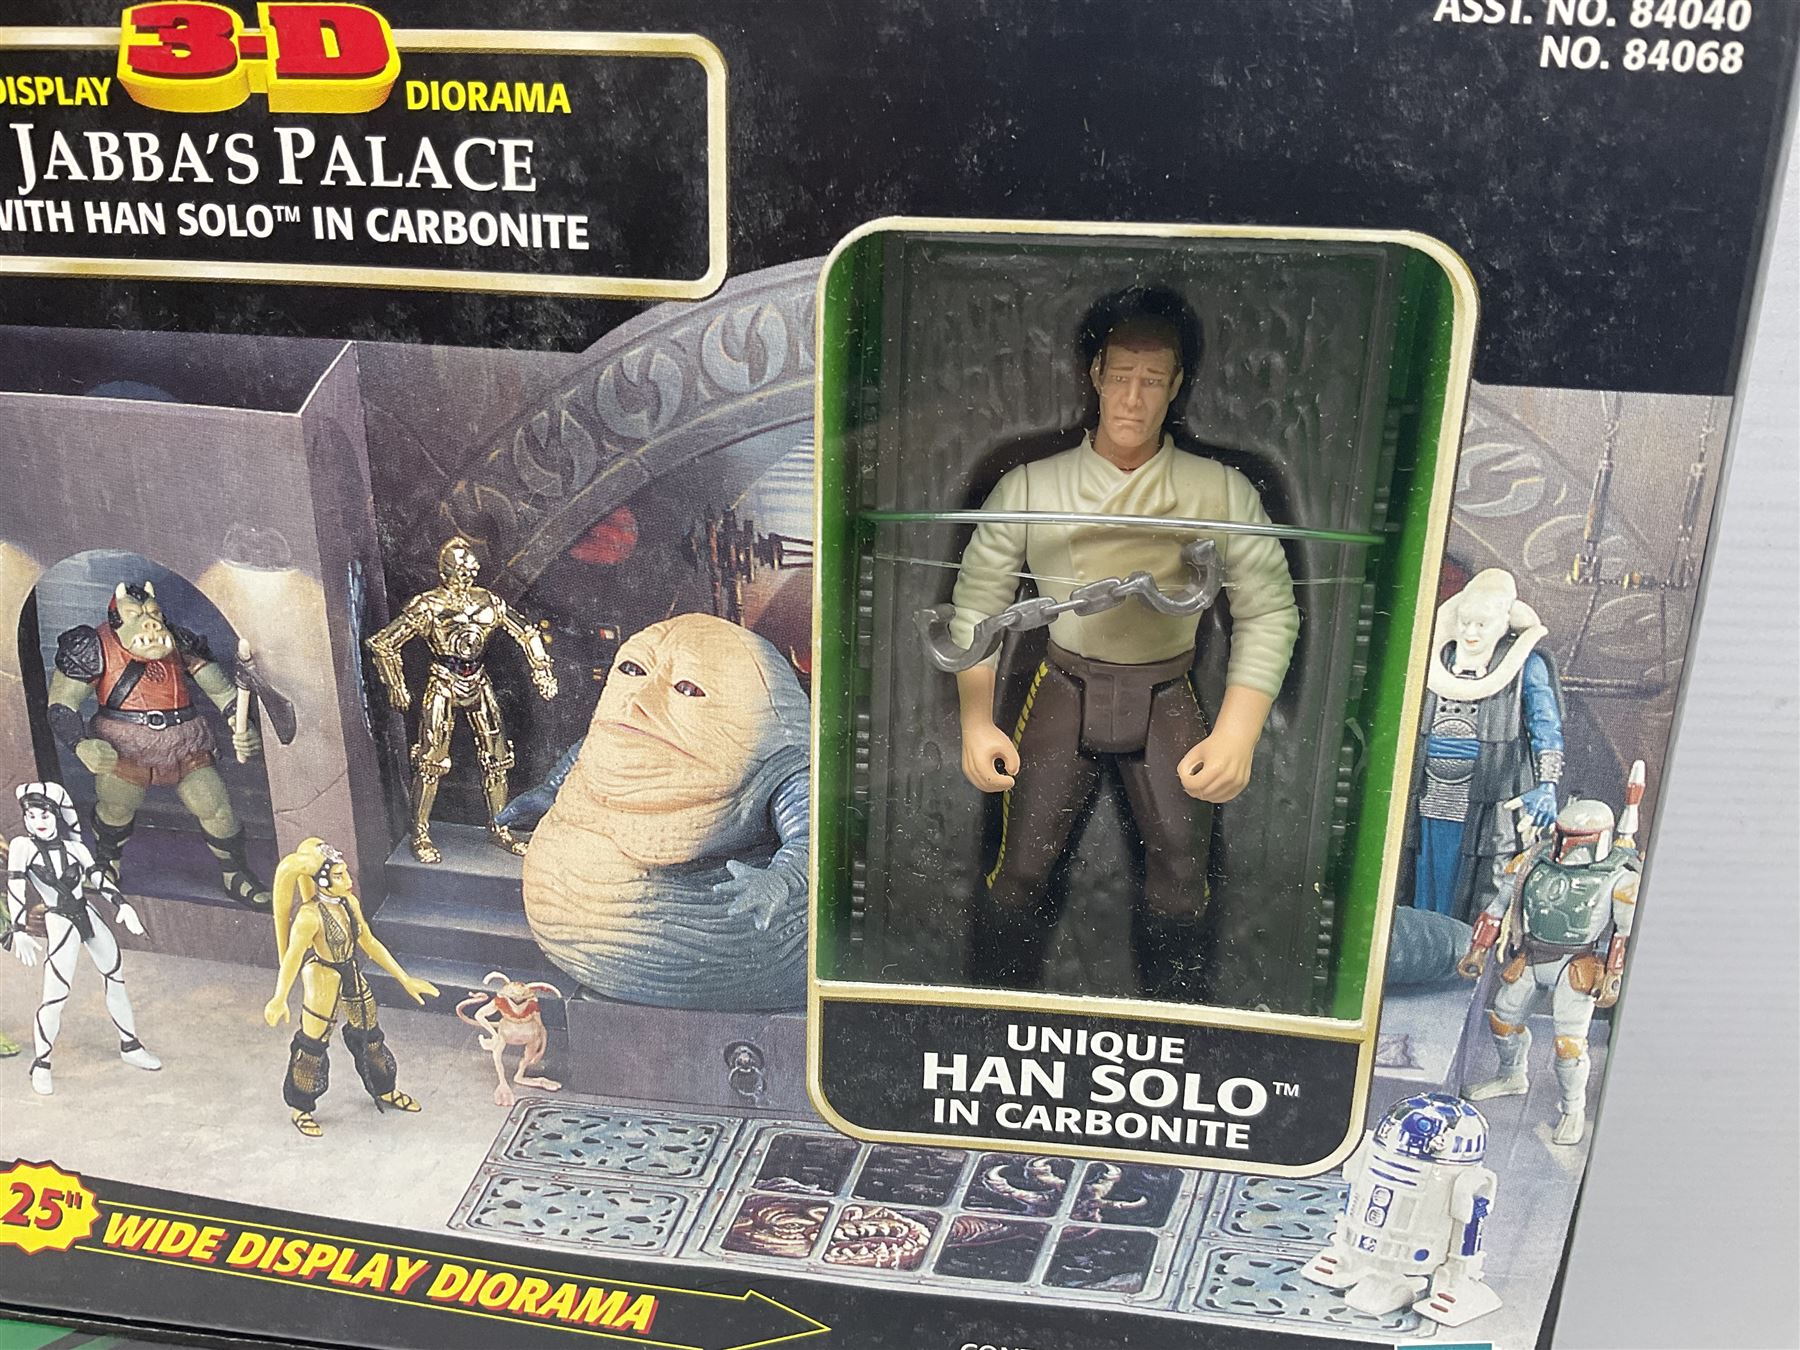 Star Wars - The Power of the Force - Cruisemissile Trooper; two x Jabba's Palace; Jabba the Hutt's D - Image 9 of 10